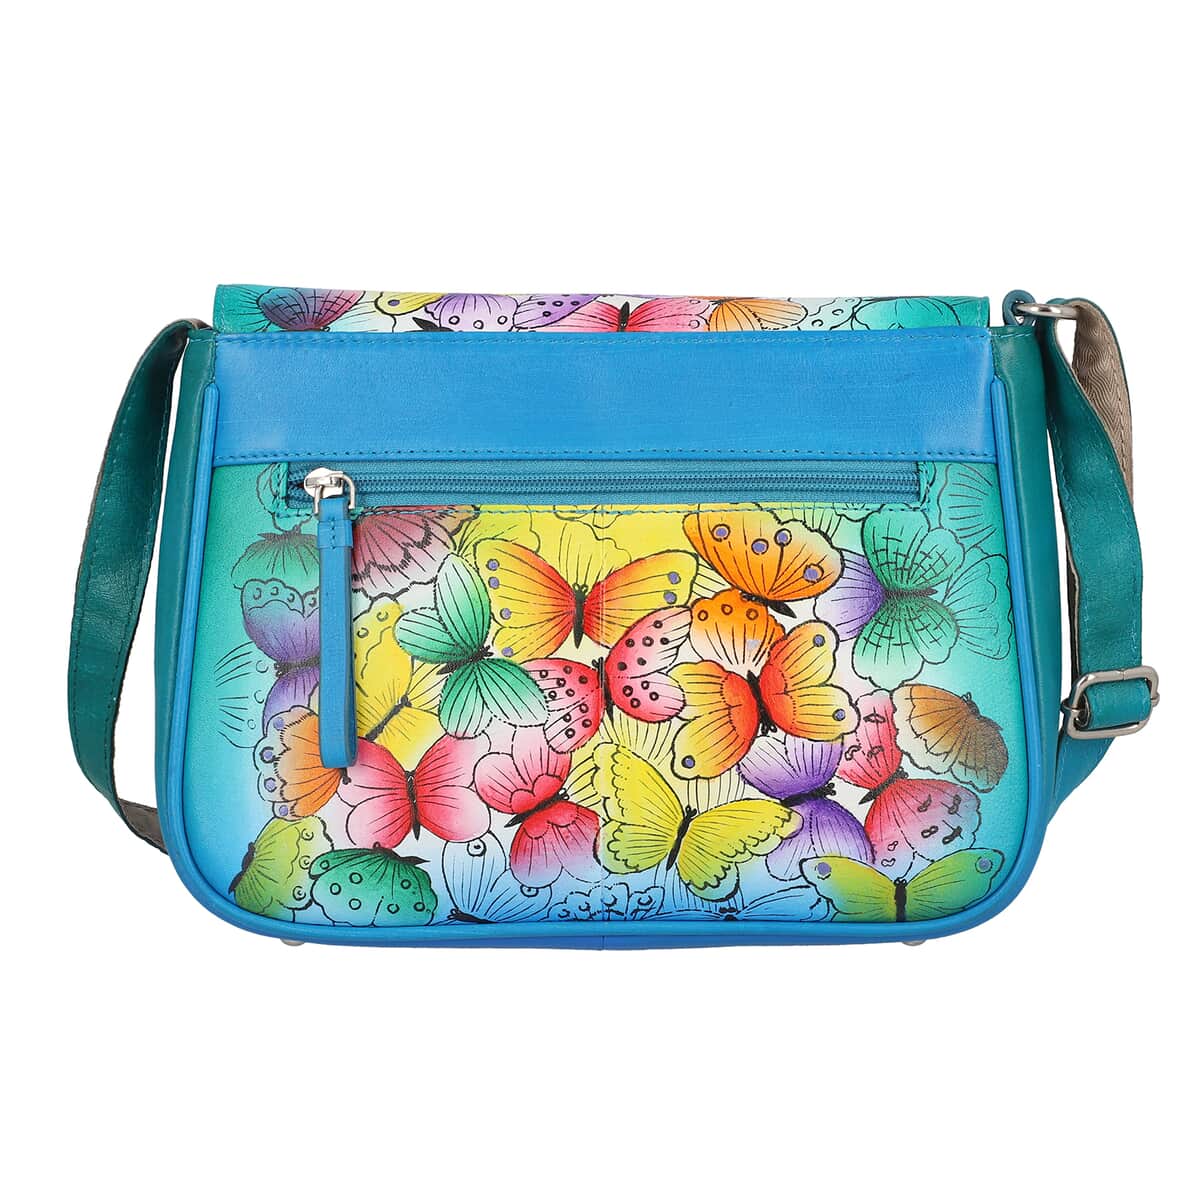 "SUKRITI 100% Genuine Leather Crossbody Bag Theme: Butterfly Color: Blue Size: 10 x 3 x 7 inches" image number 4